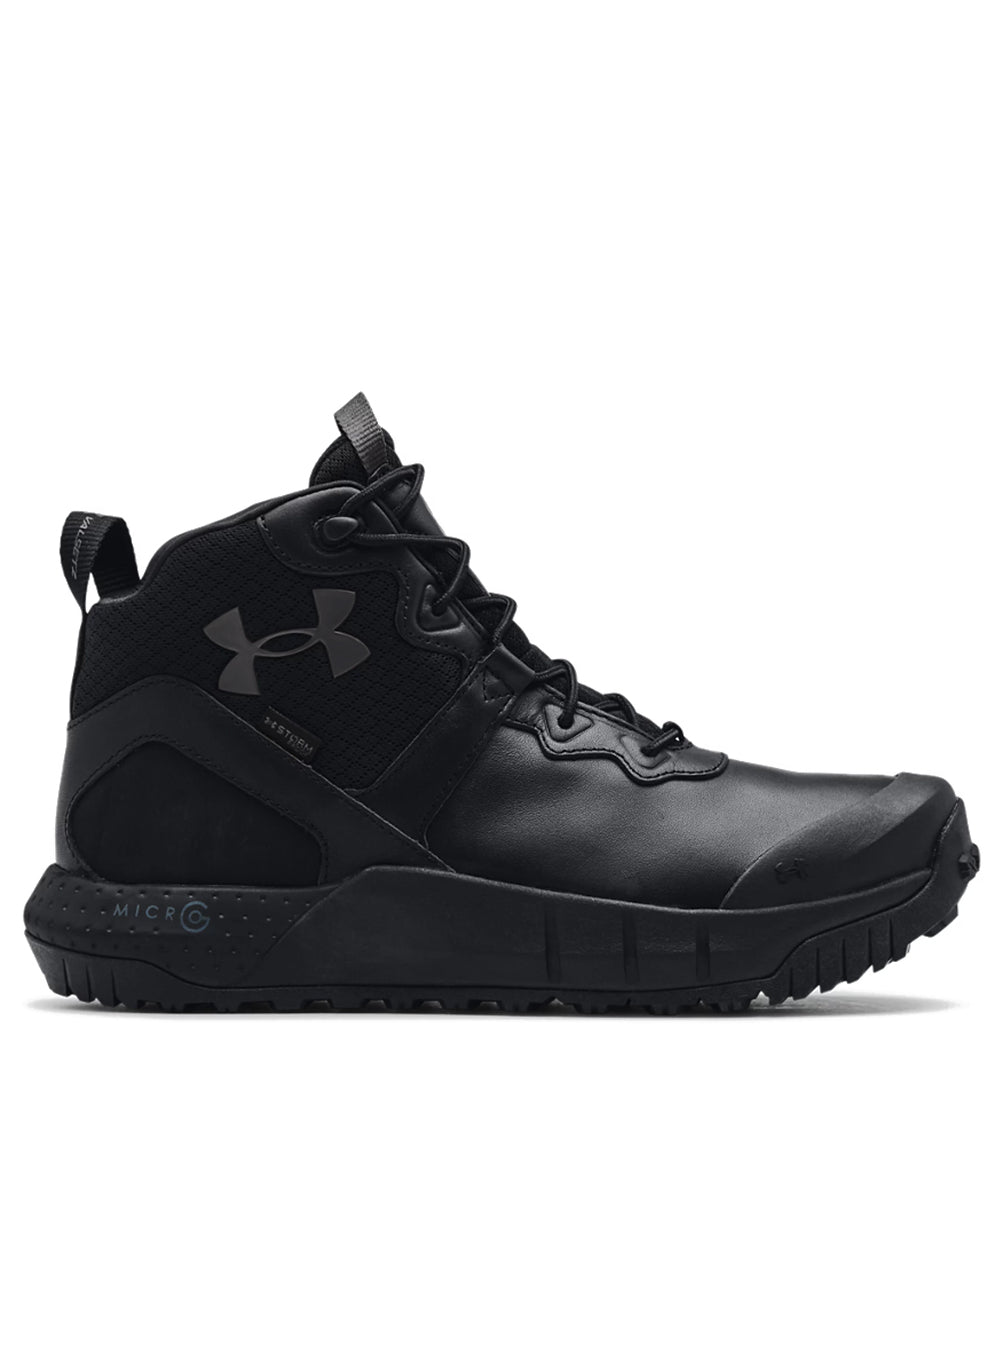 EXCLUSIVE - Under Armour Micro G Valsetz Mid Leather Tactical Gear